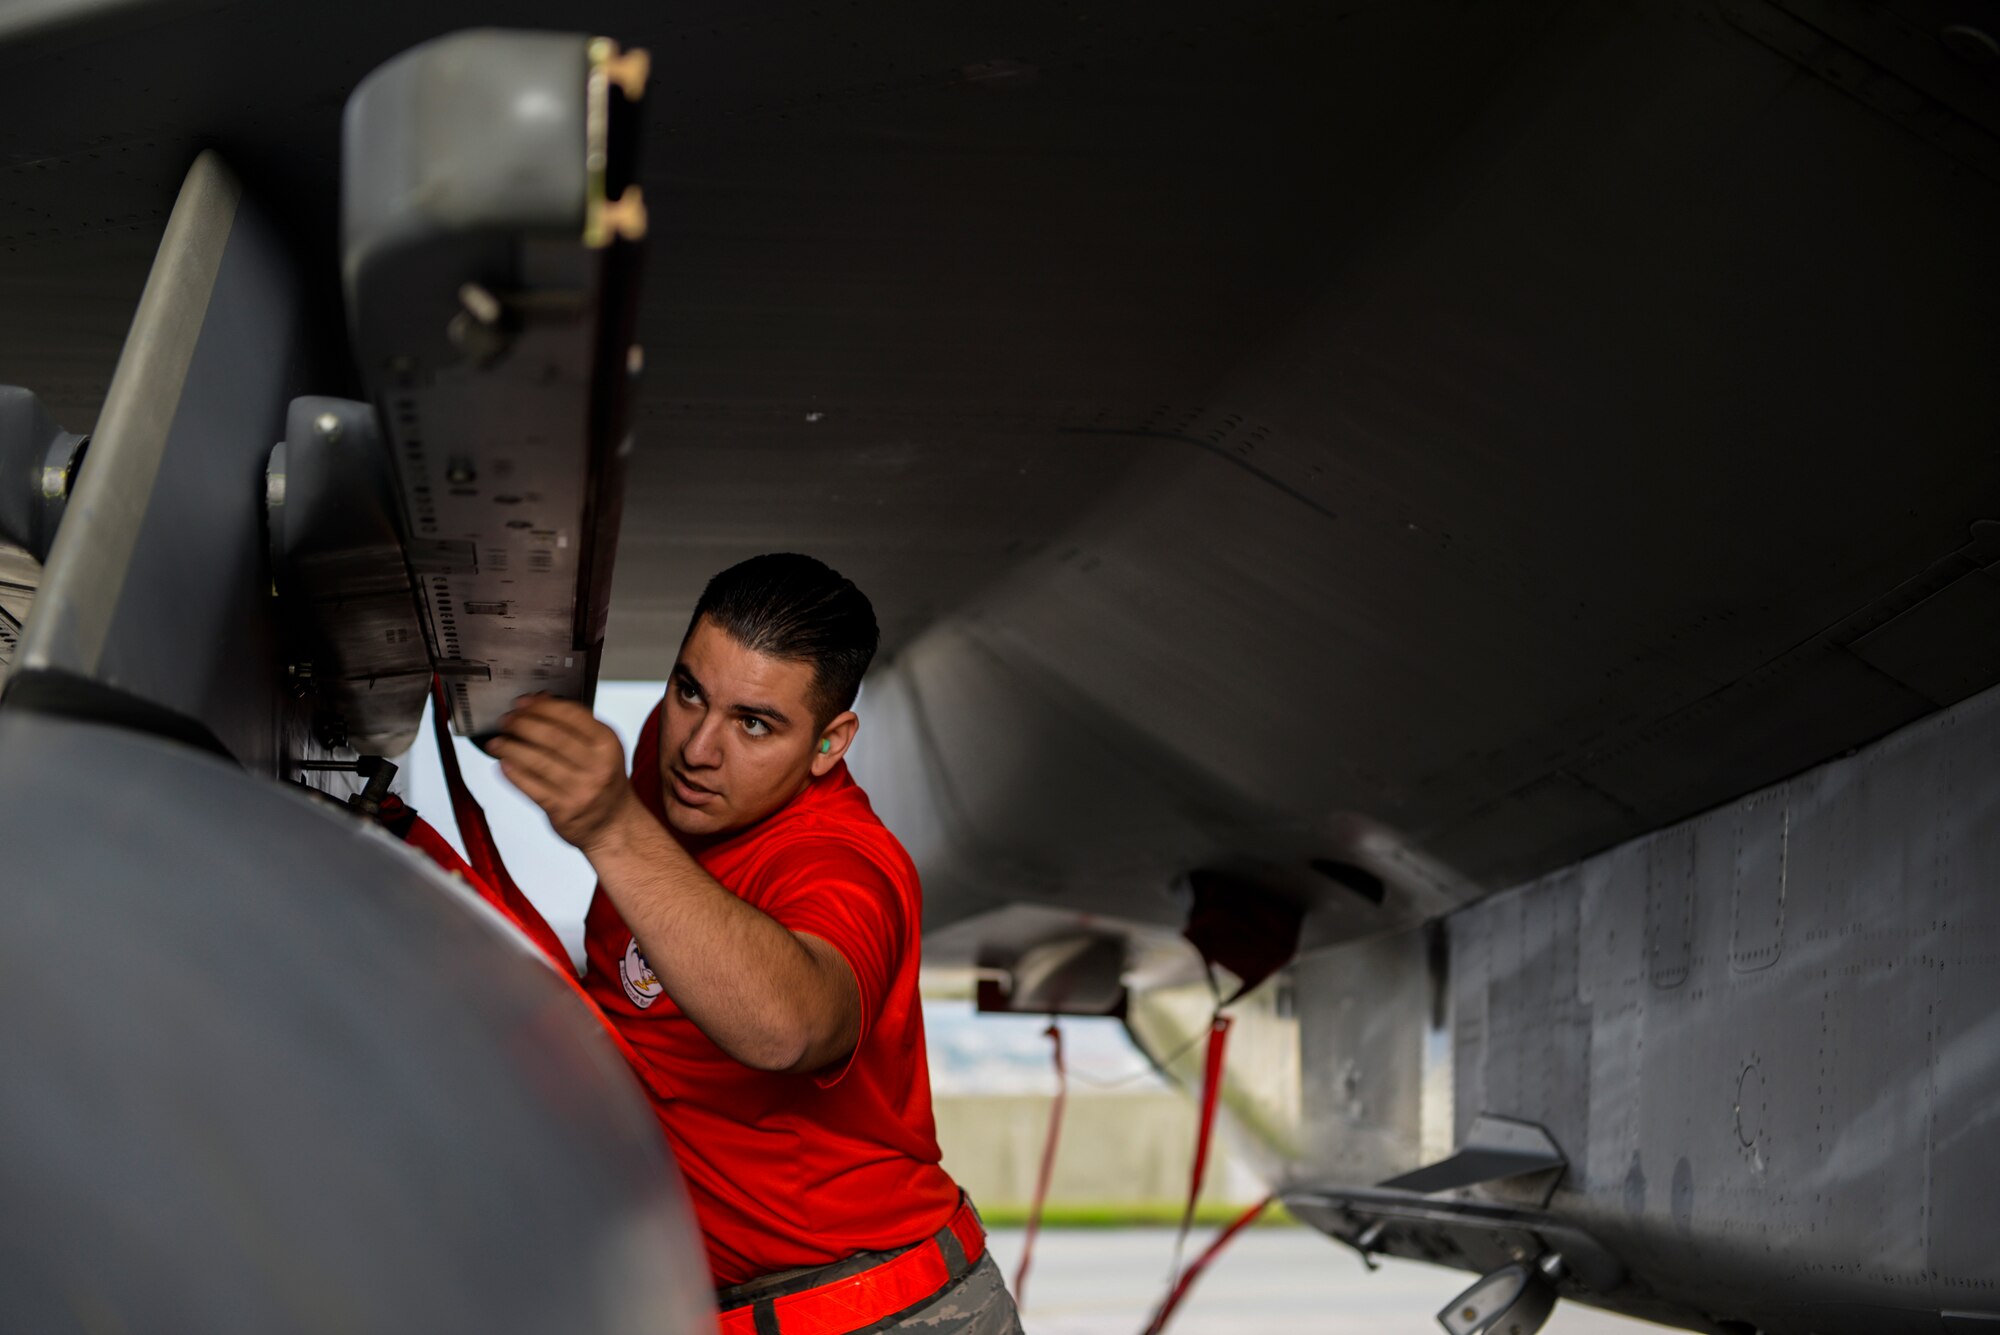 U.S. Air Force Senior Airman Adan Lopez, 67th Aircraft Maintenance Unit weapons load crew chief, inspects an F-15 Eagle before loading munitions during a weapons load competition Jan. 8, 2016, at Kadena Air Base, Japan. The weapons load competition was for the first quarter of 2016 against the 44th Fighter Squadron with the winner gaining bragging rights. (U.S. Air Force photo by Senior Airman Stephen G. Eigel)